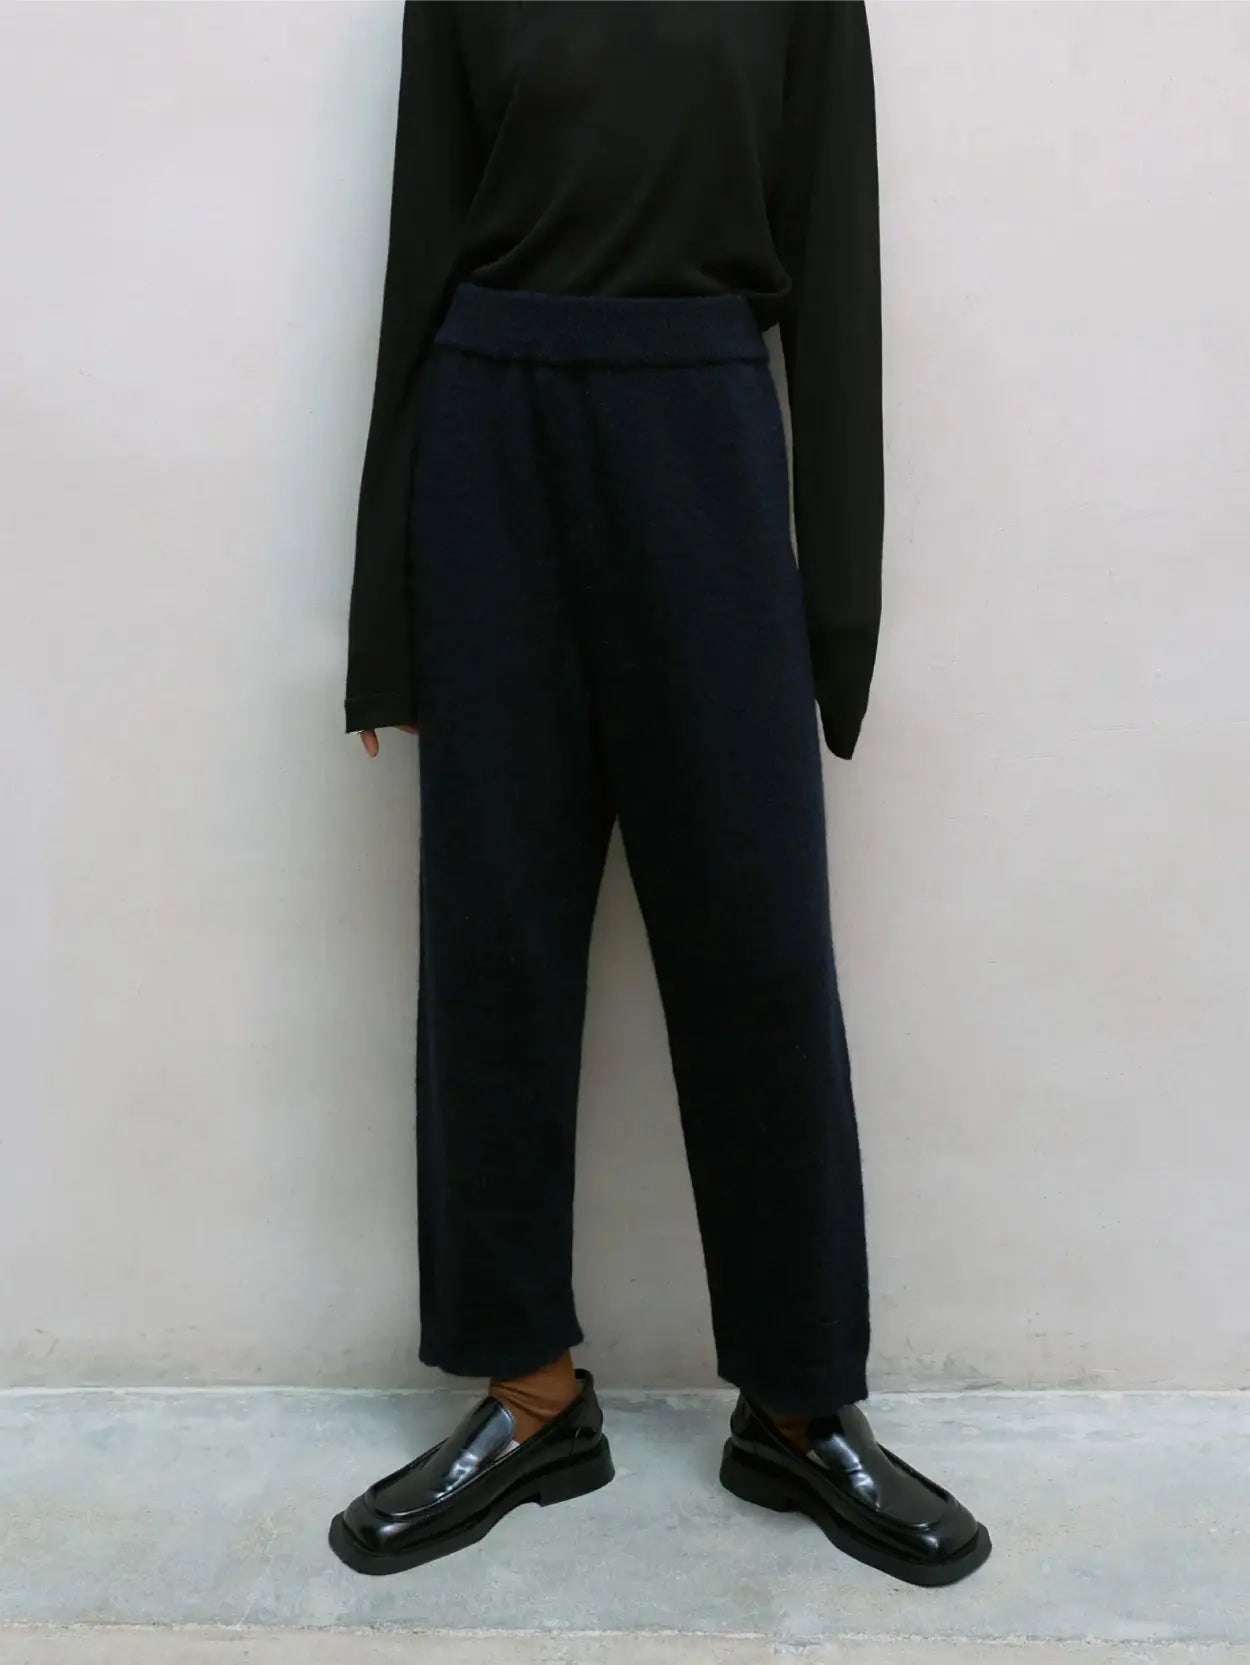 A person is standing against a white wall, wearing a black long-sleeve top, Baby Alpaca Knit Pants Navy from Cordera, and black shiny loafers. The person’s head is not shown in the image.